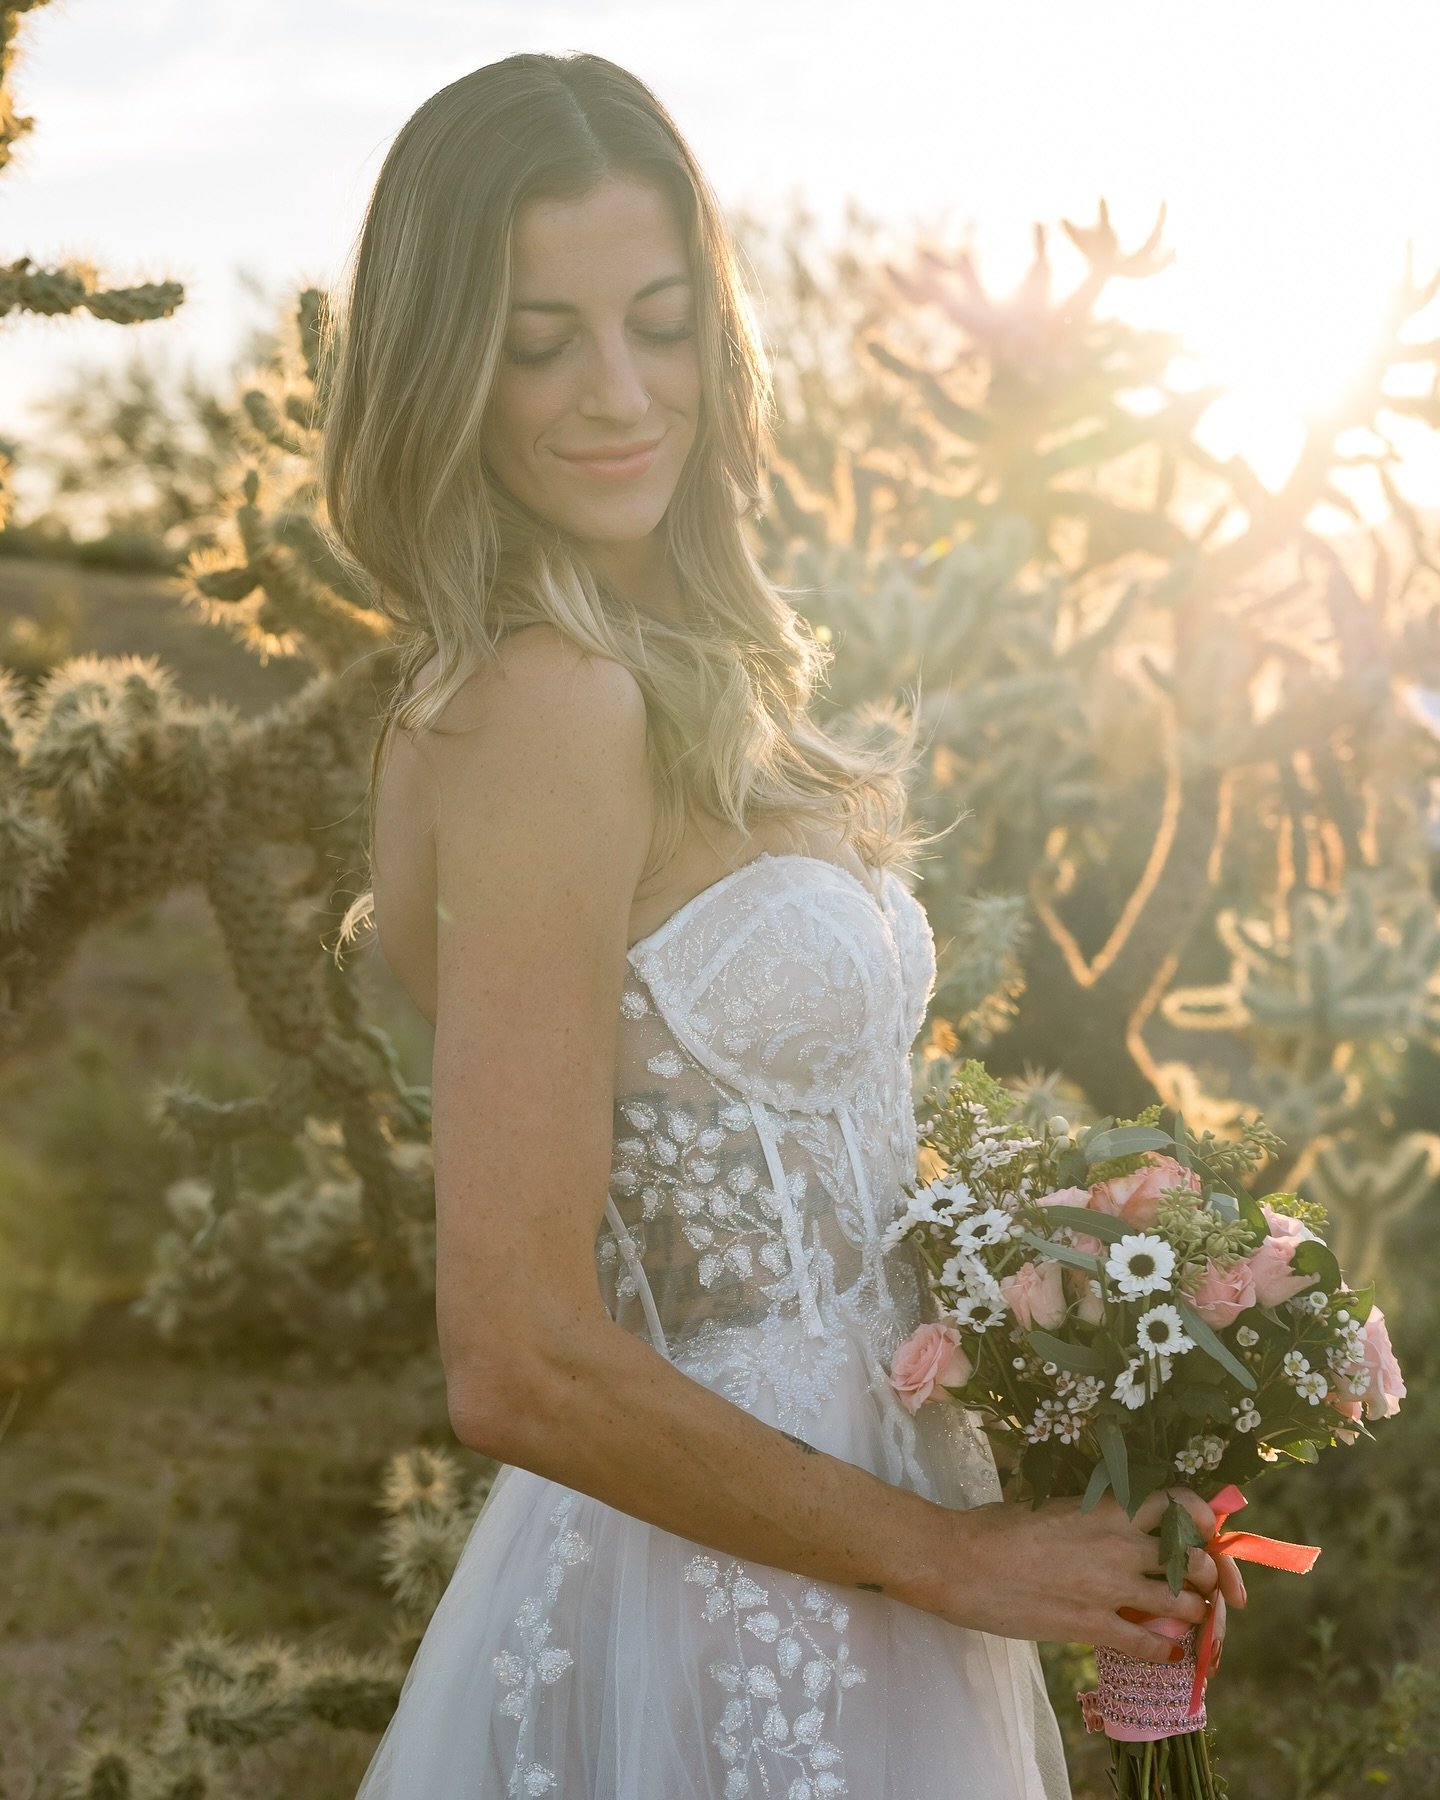 she&rsquo;s a glowing wife ✨ I love the contrast of soft lace and tule of her dress with the sharp cacti in this shot of @xoxobrimet 

📍: somewhere near Lost Dutchman state park

#azwedding #azbride #ido #married #weddingphotography #weddingphotos #